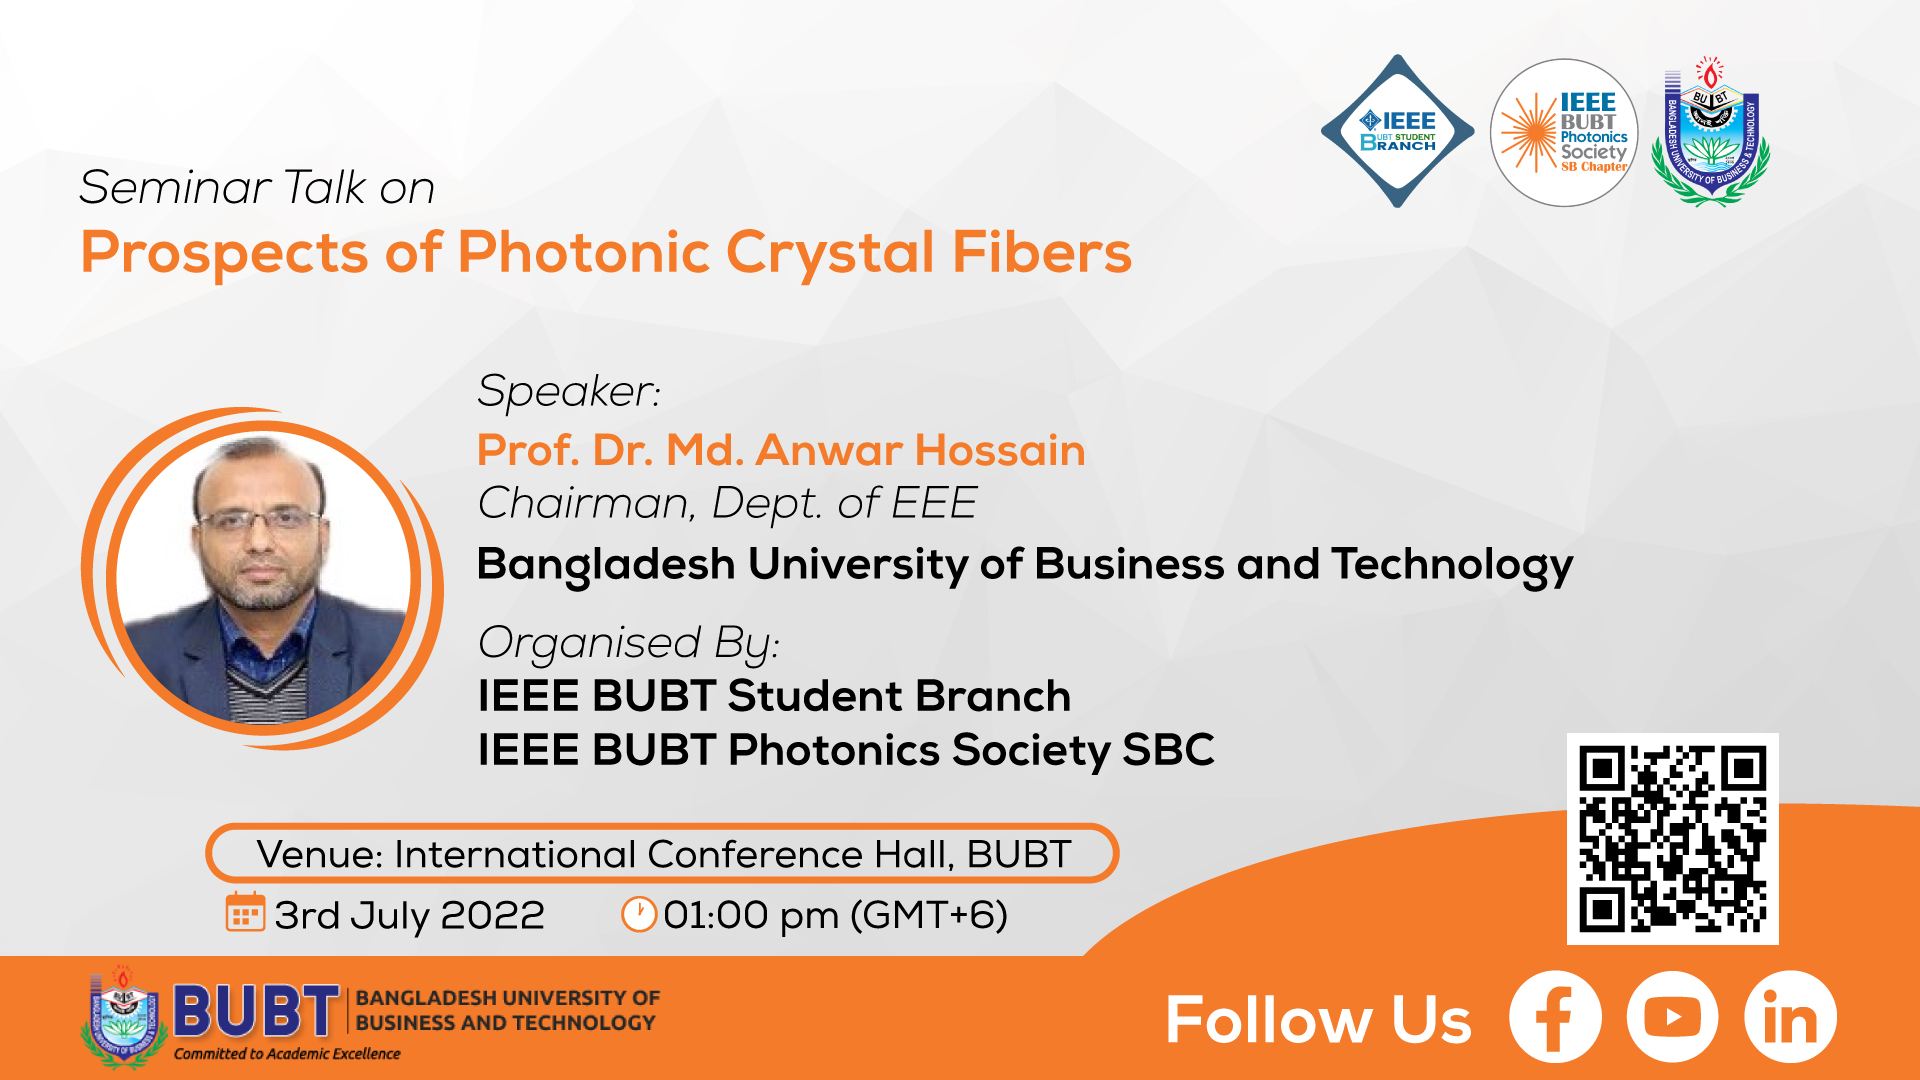 Invited Talk of Prof. Dr. Md. Anwar Hossain at the Seminar on Prospect of Photonic Crystal Fibers organized by IEEE BUBT SB, BUBT